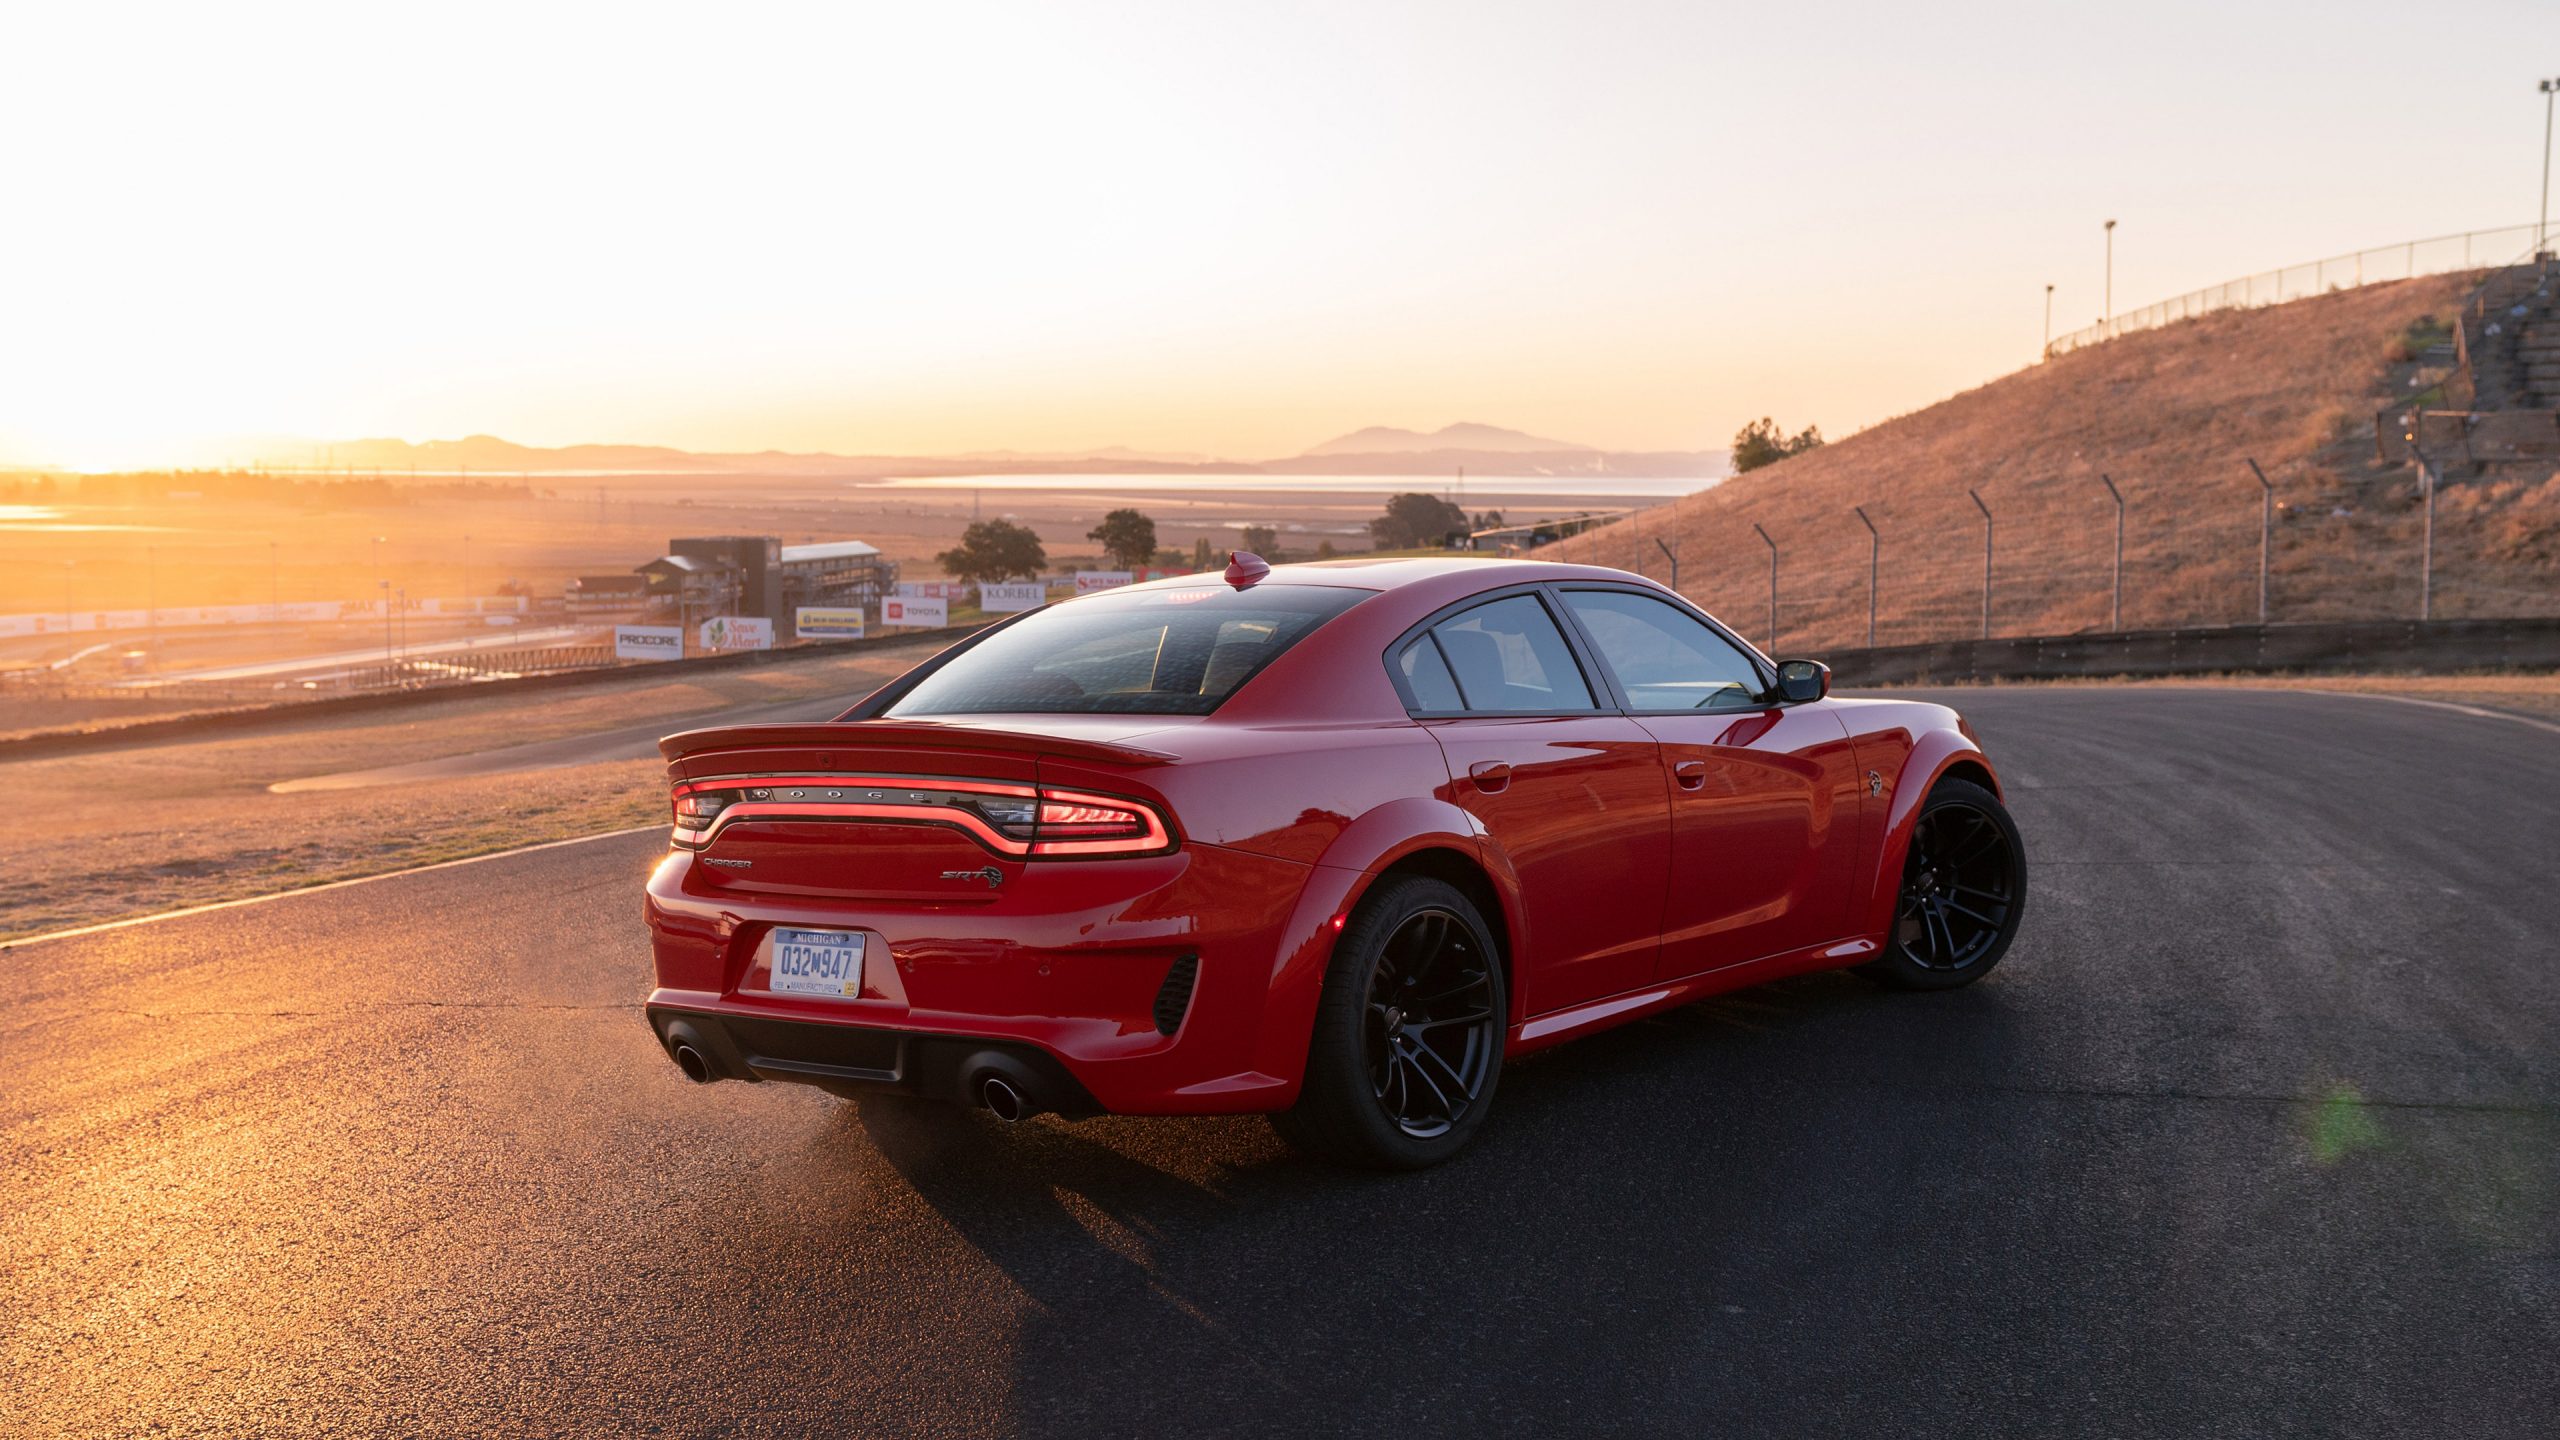 Dodge Charger Srt Wallpapers